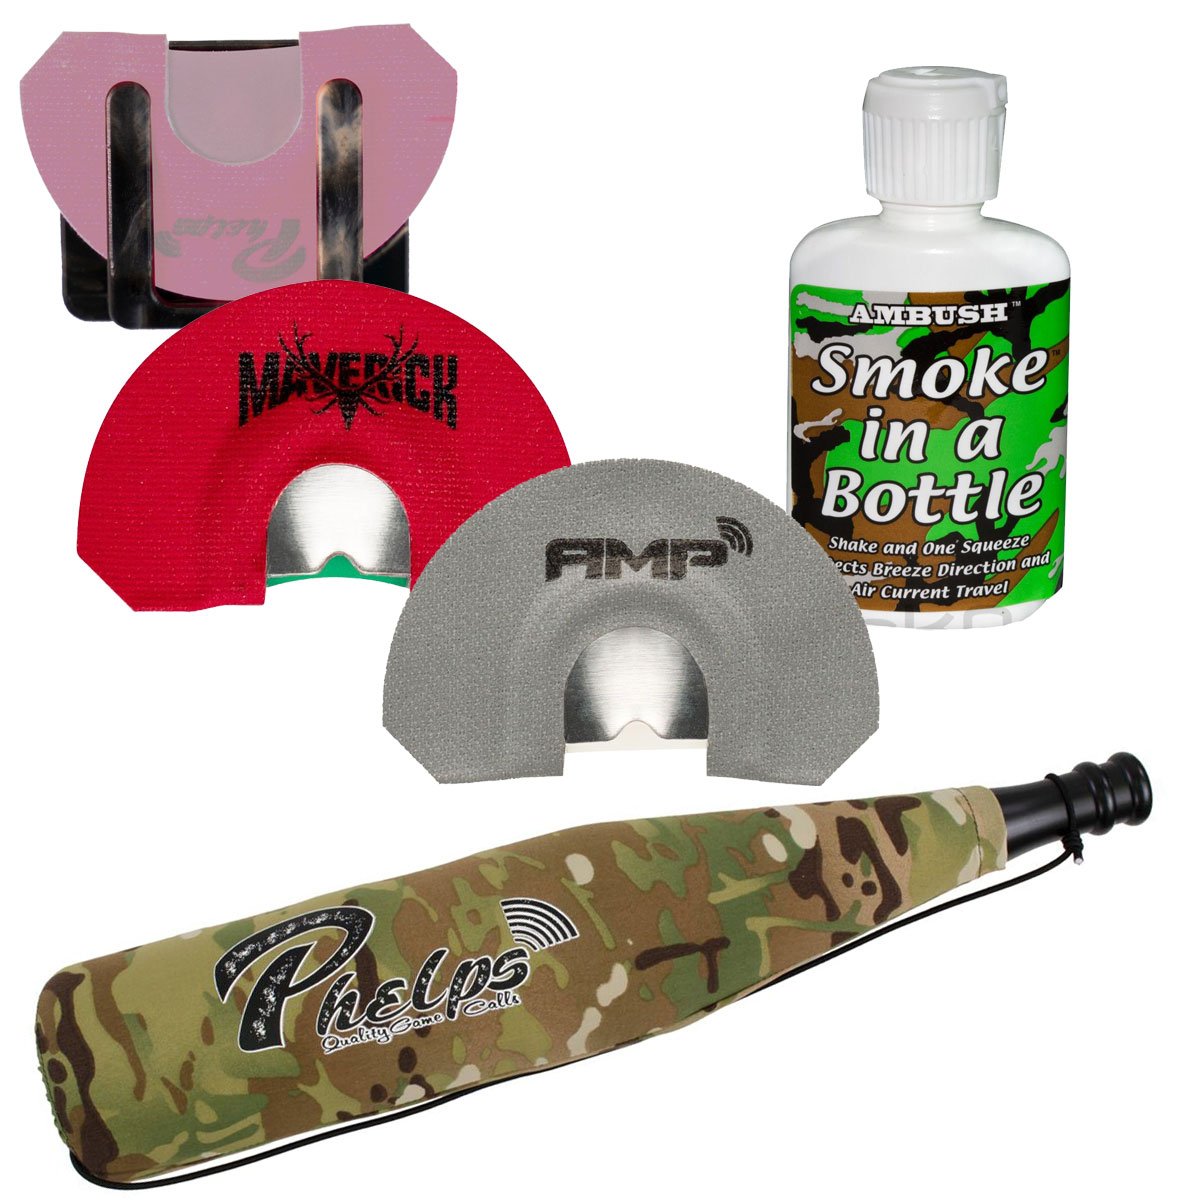 Phelps Game Calls Bare Essentials Elk Calling Kit with Tube